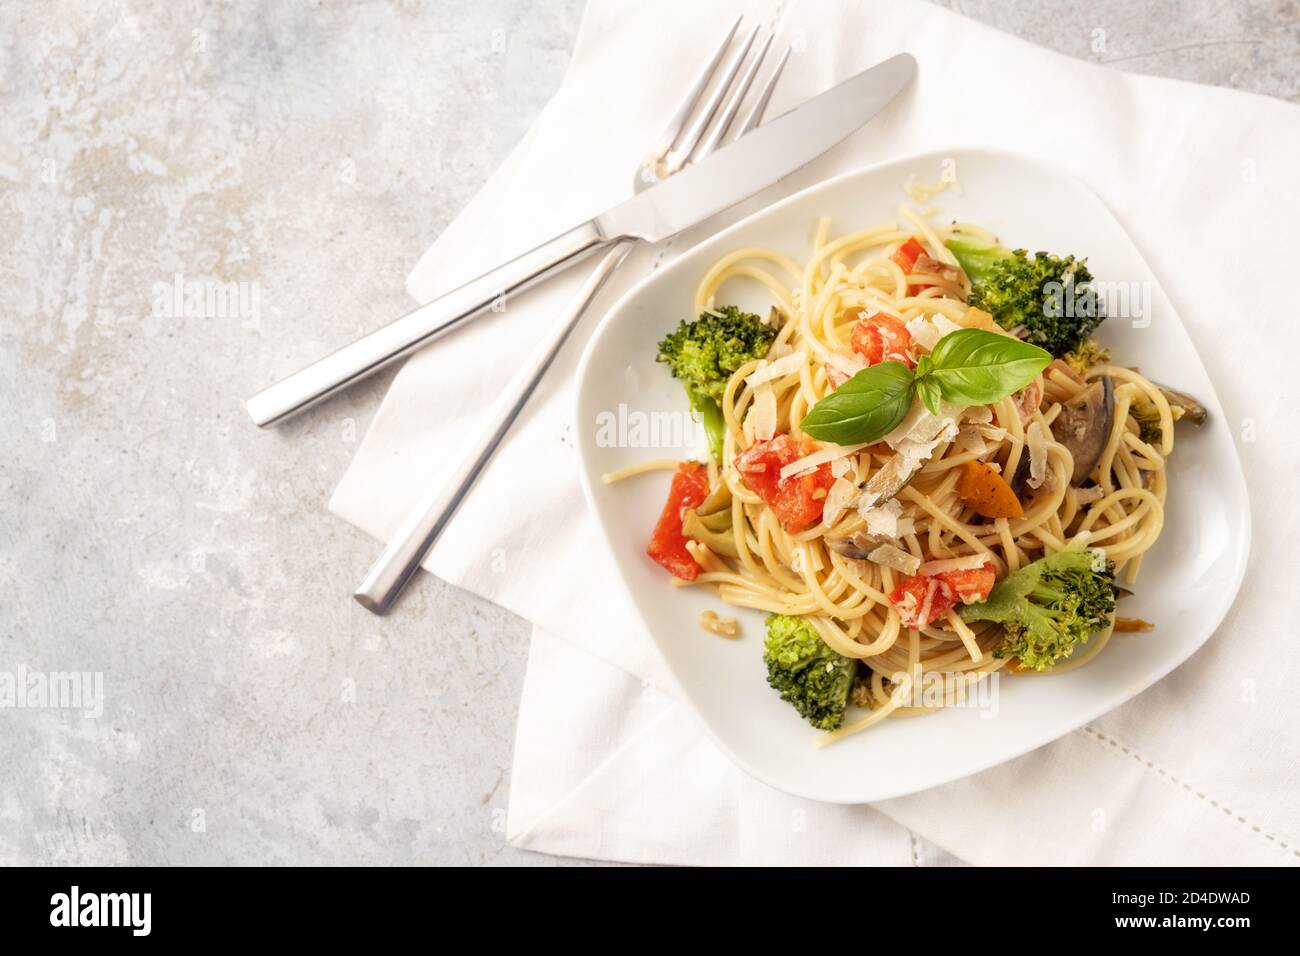 Spaghetti with tomatoes, broccoli, bell pepper, eggplant and herb garnish, healthy vegetarian pasta meal on a white plate and a light rustic backgroun Stock Photo